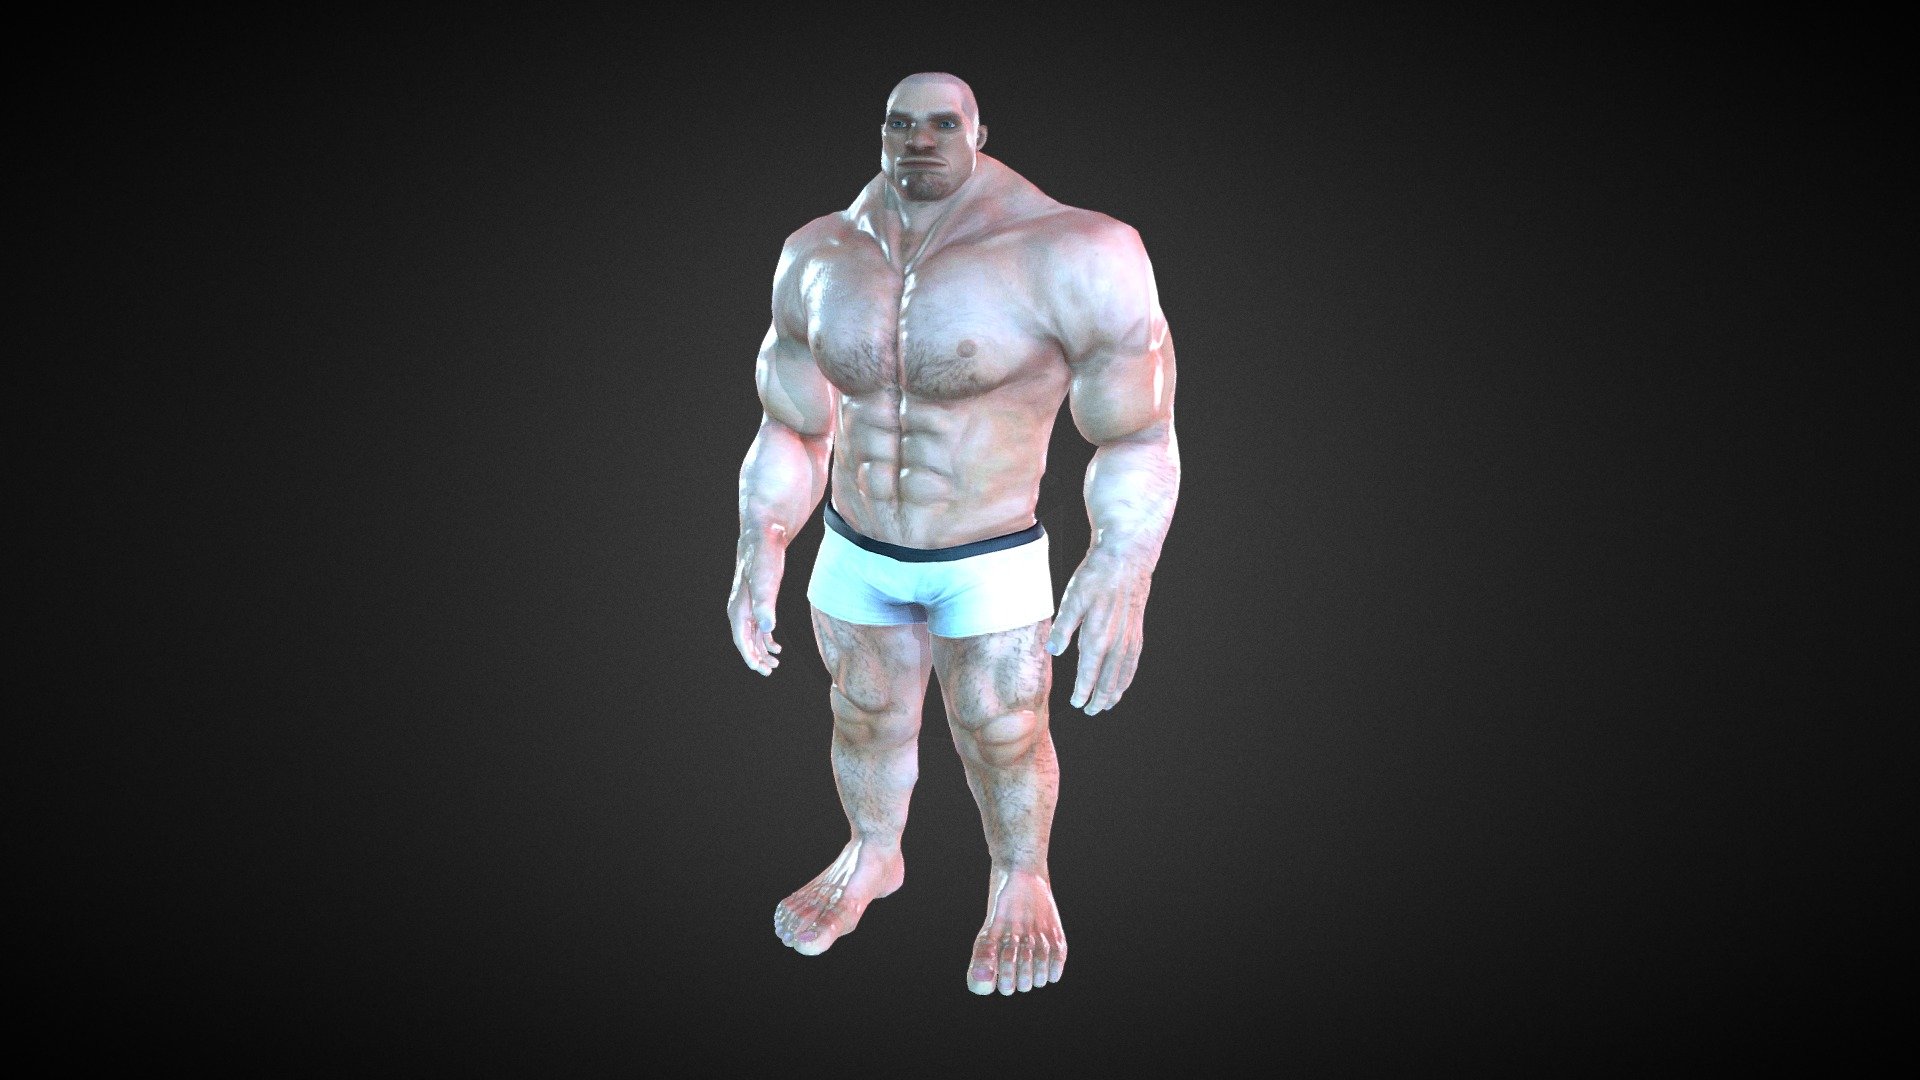 CC Barbarian Morph from my HEROES character pack. Check out all my CC character morphs here:

https://www.reallusion.com/contentstore/featureddeveloper/profile/#!/ToKoMotion/Character%20Creator - iClone Character Creator - Barbarian Morph - 3D model by ToKoMotion 3d model